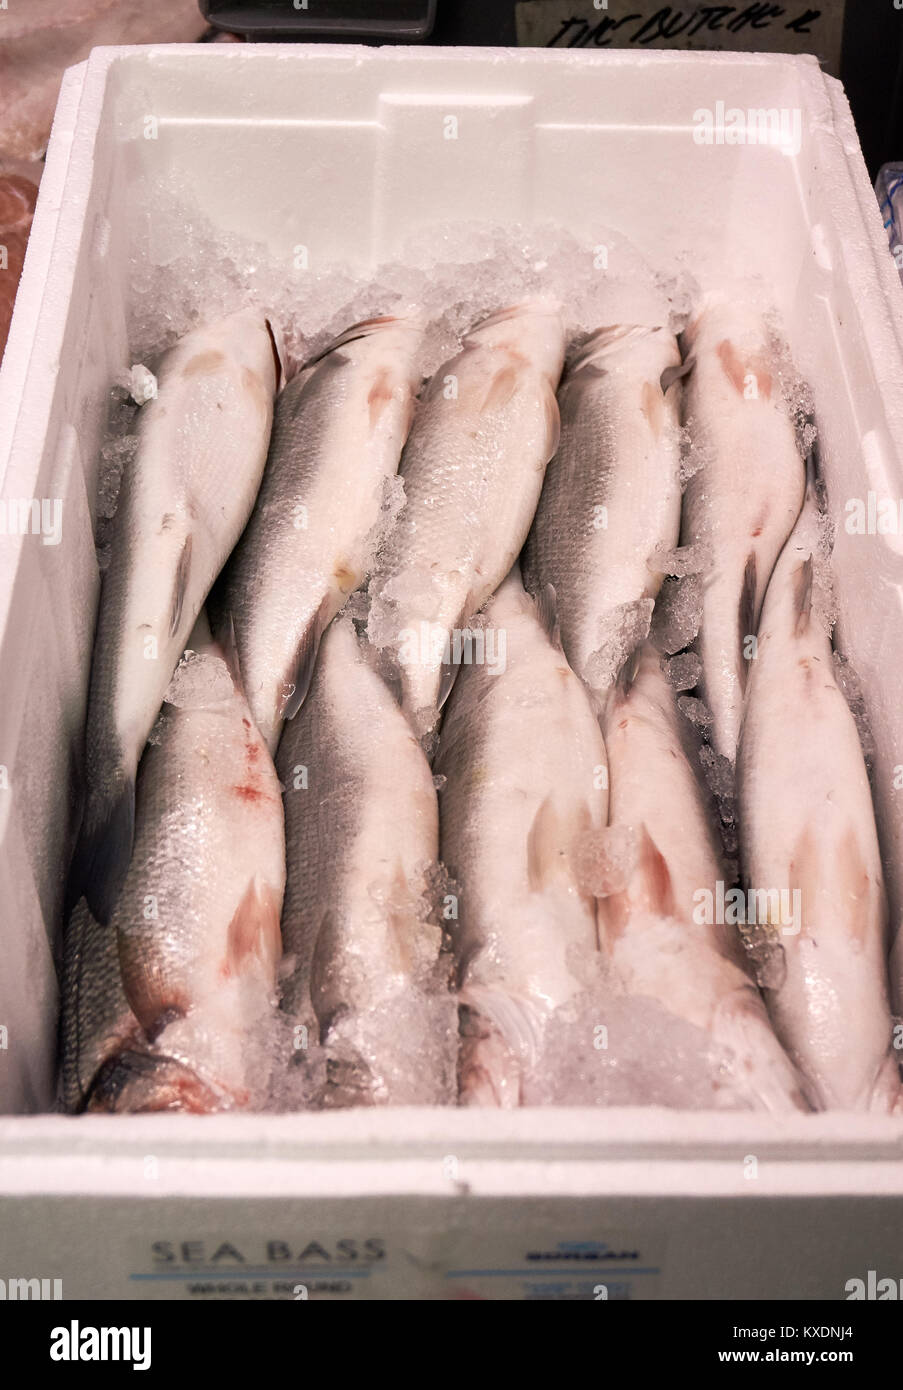 Farmed Turkish sea bass packed in a styrofoam box for sale at a local fishmonger, Glasgow, Scotland. Stock Photo